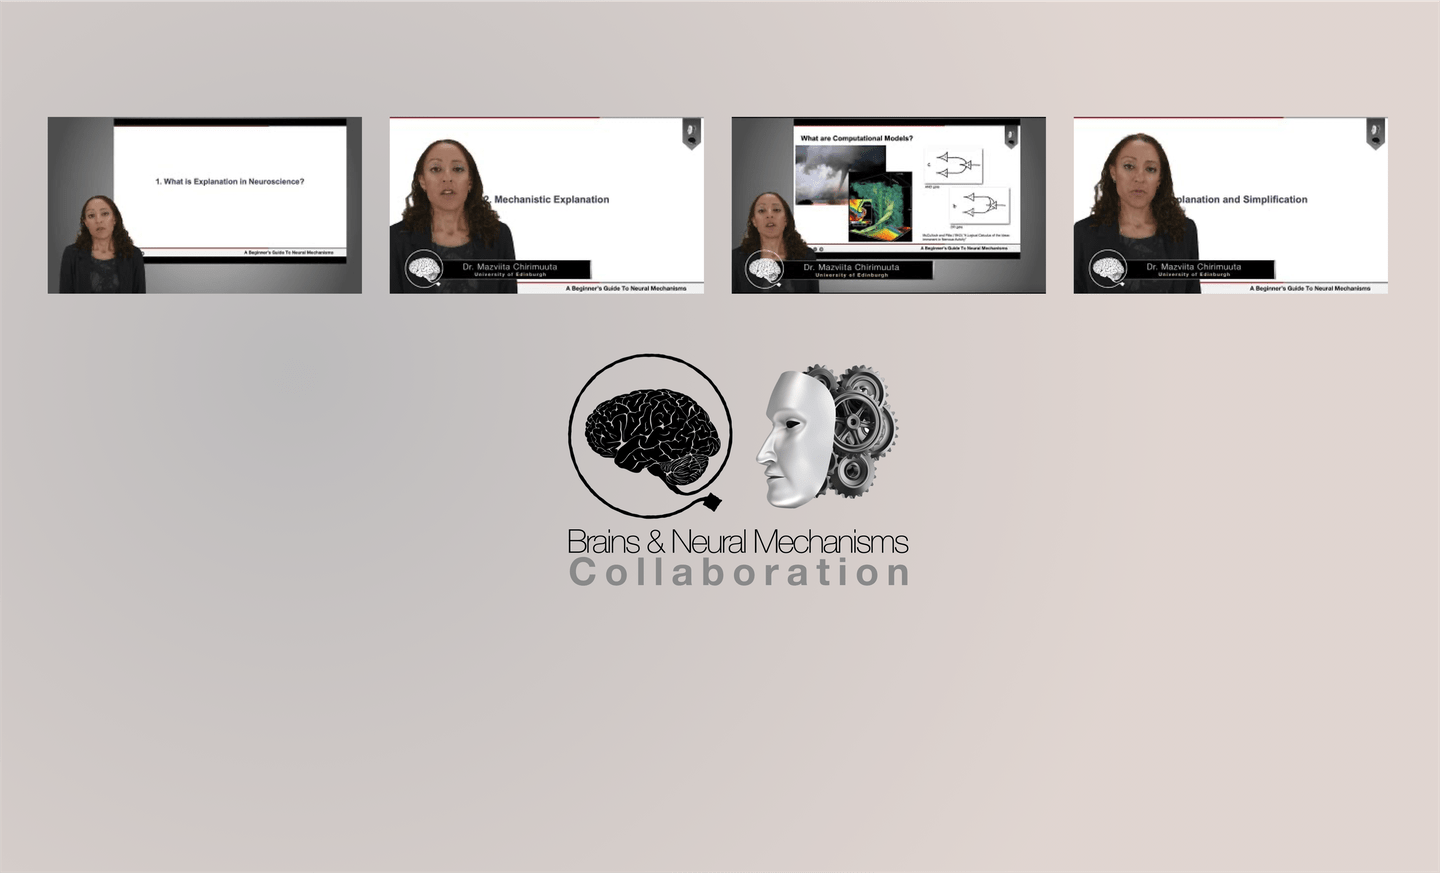 Four Videos About Neuroscience Models and Explanations — Dr. Mazviita Chirimuuta